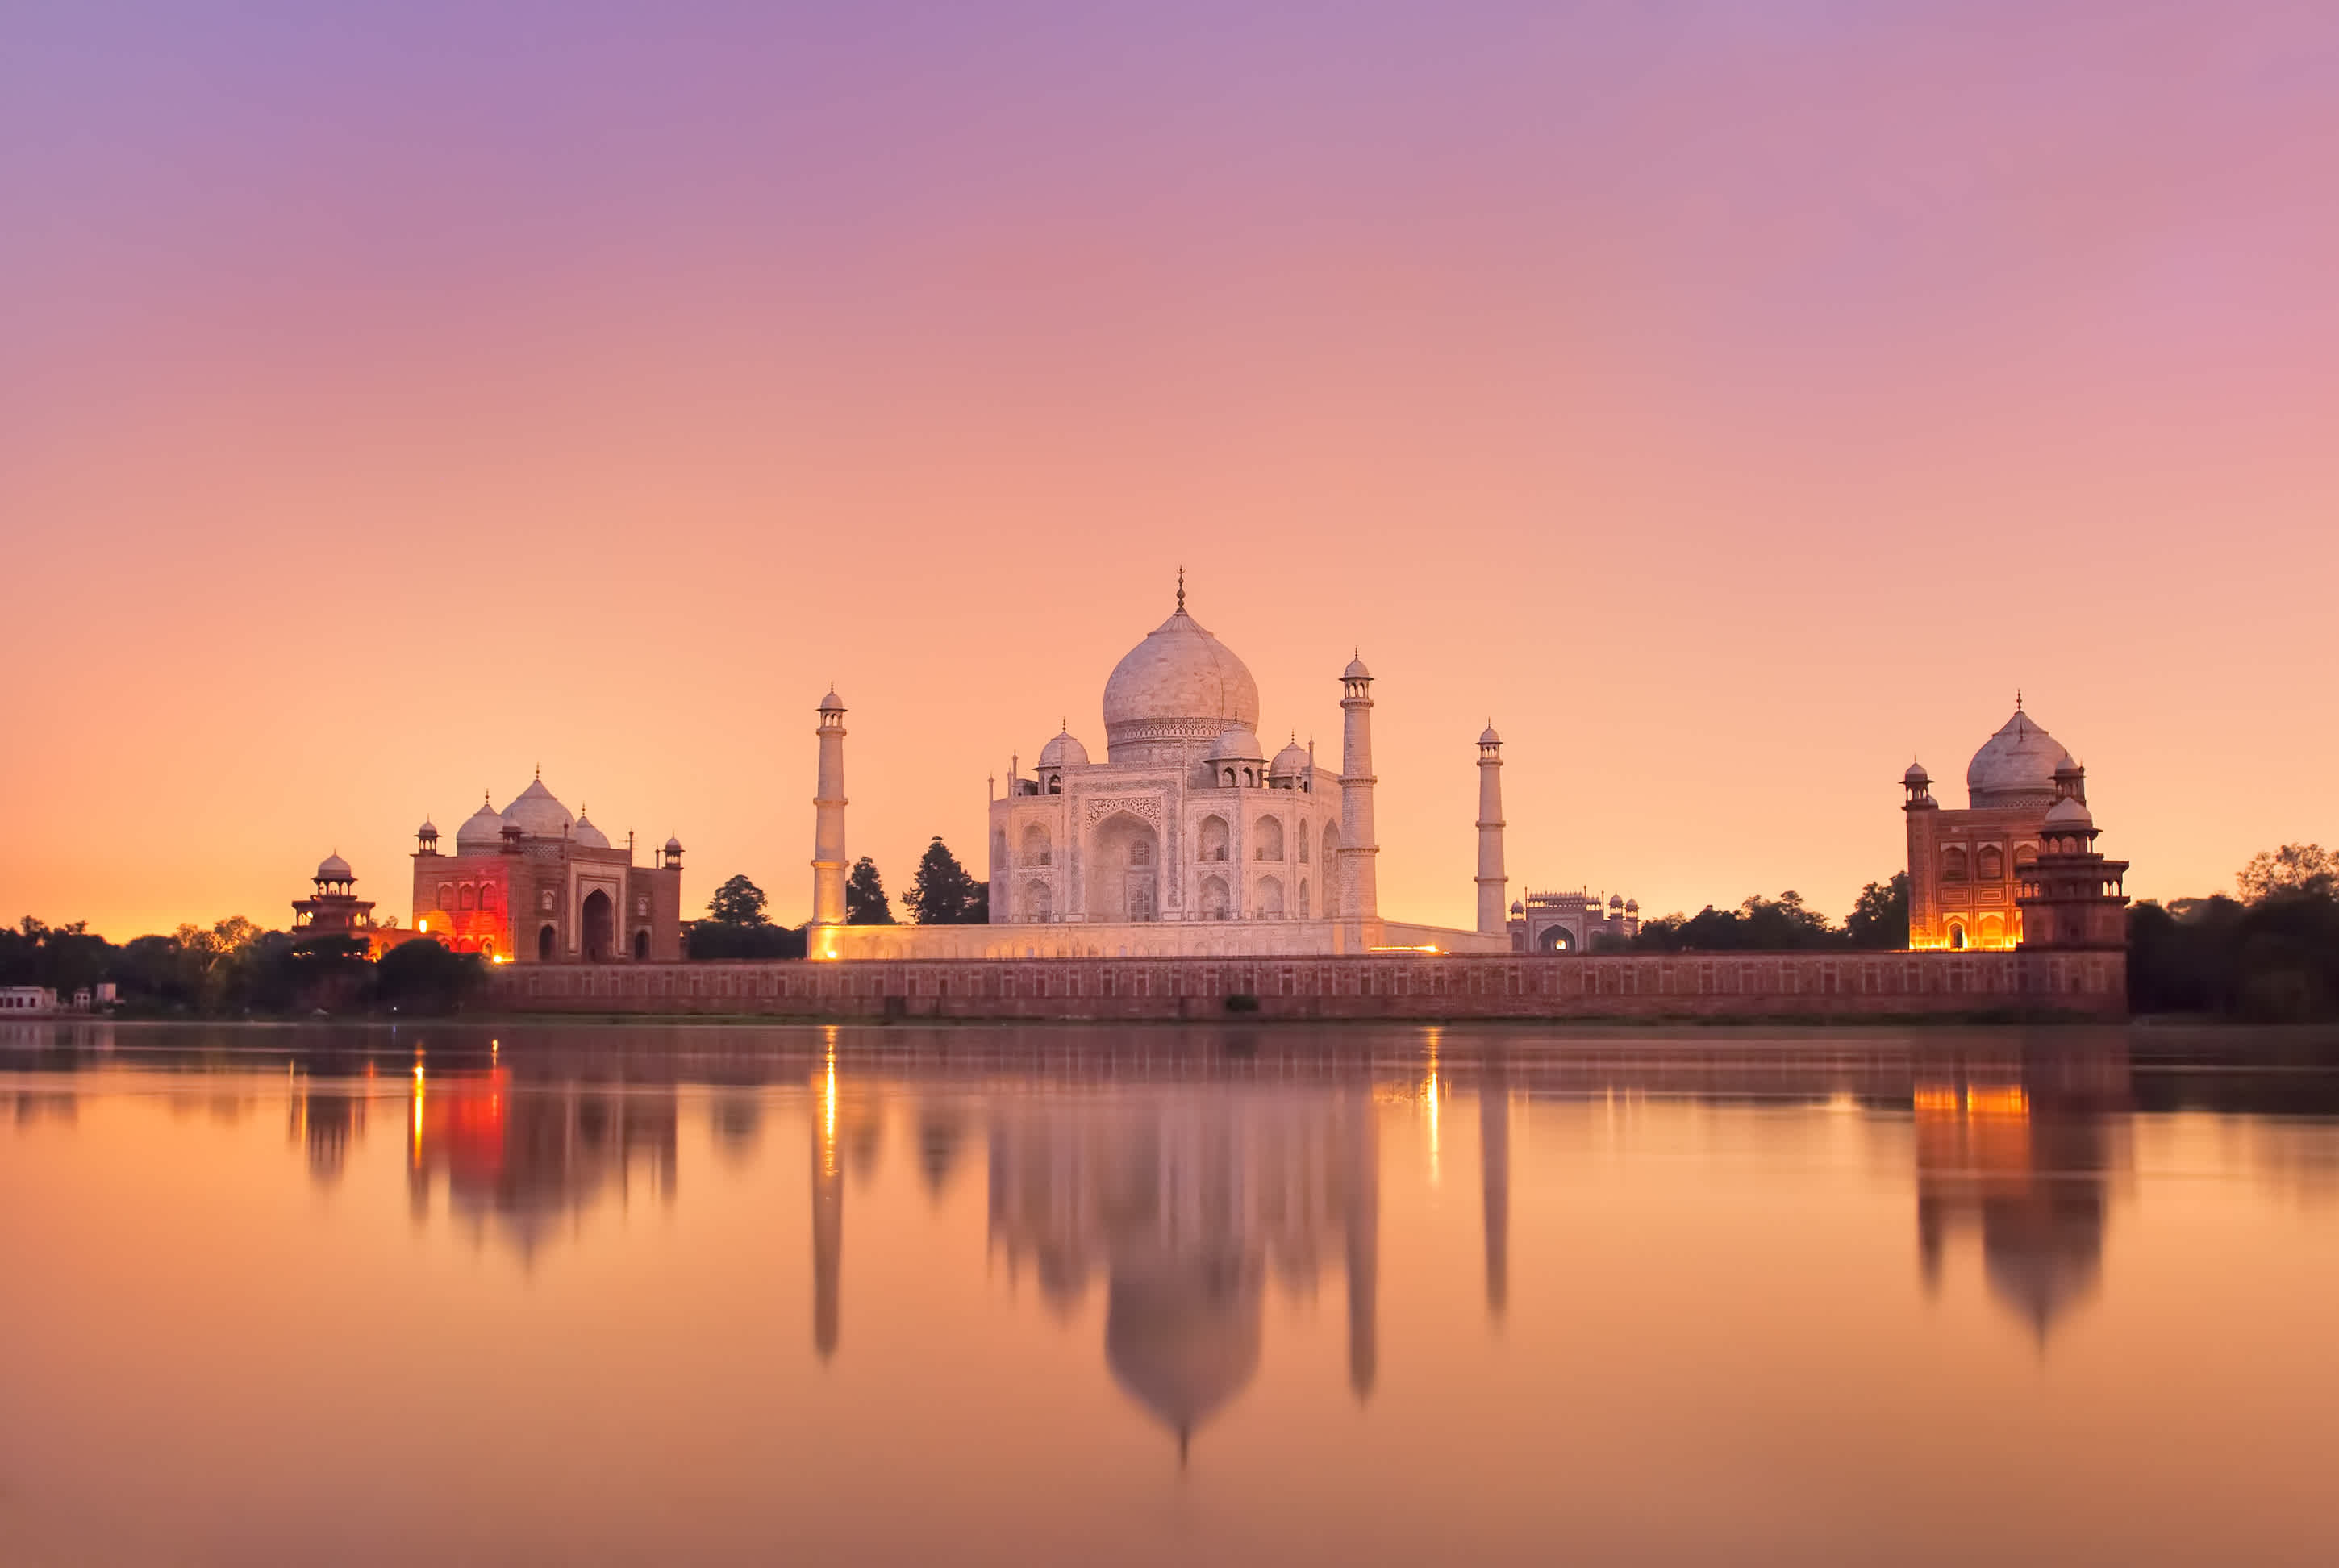 View_from_the_water_to_the_Taj_Mahal_in_Agra_India